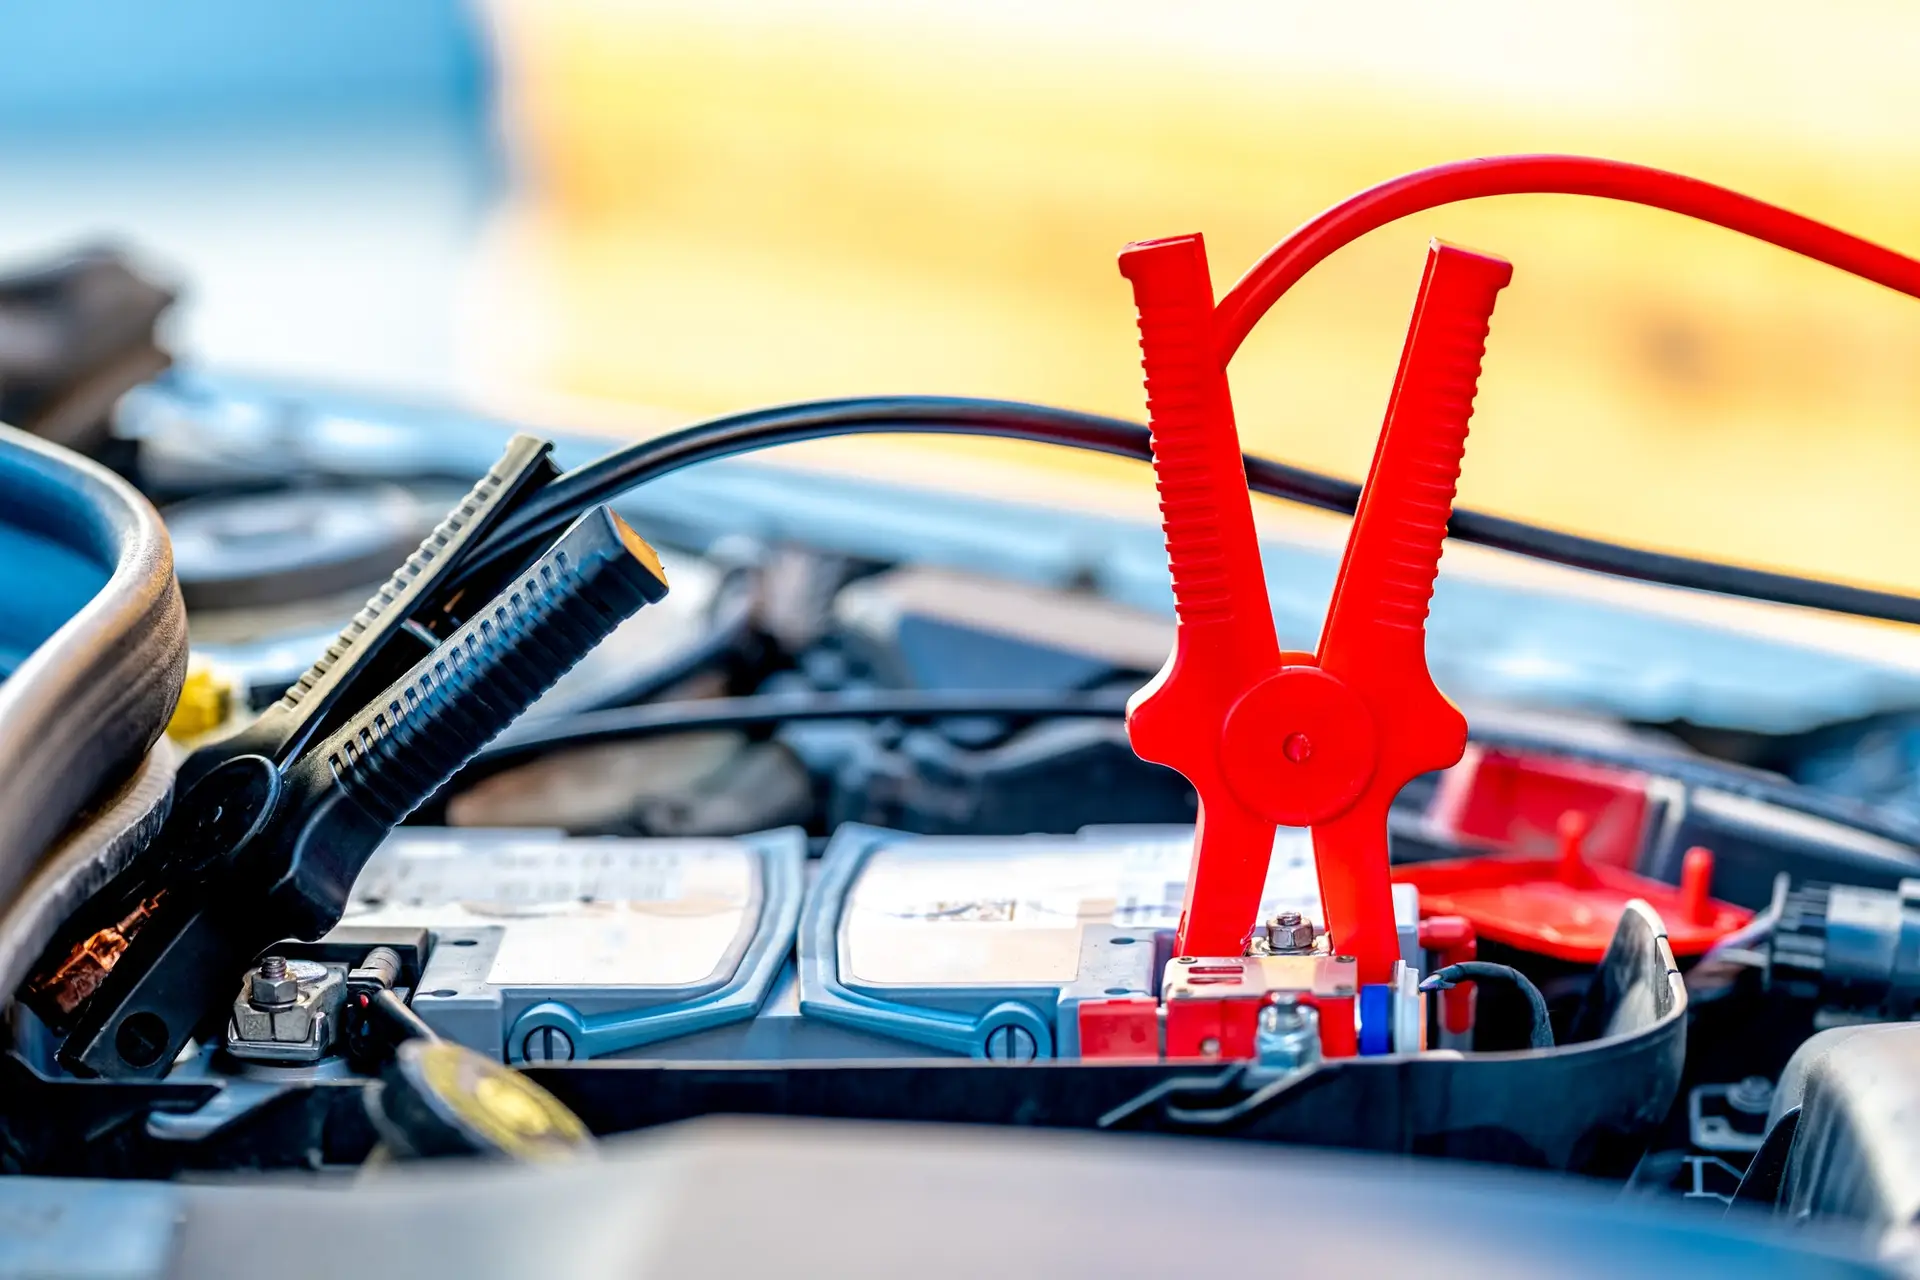 How To JumpStart a Car Without Another Car? starting the car using the starter cables